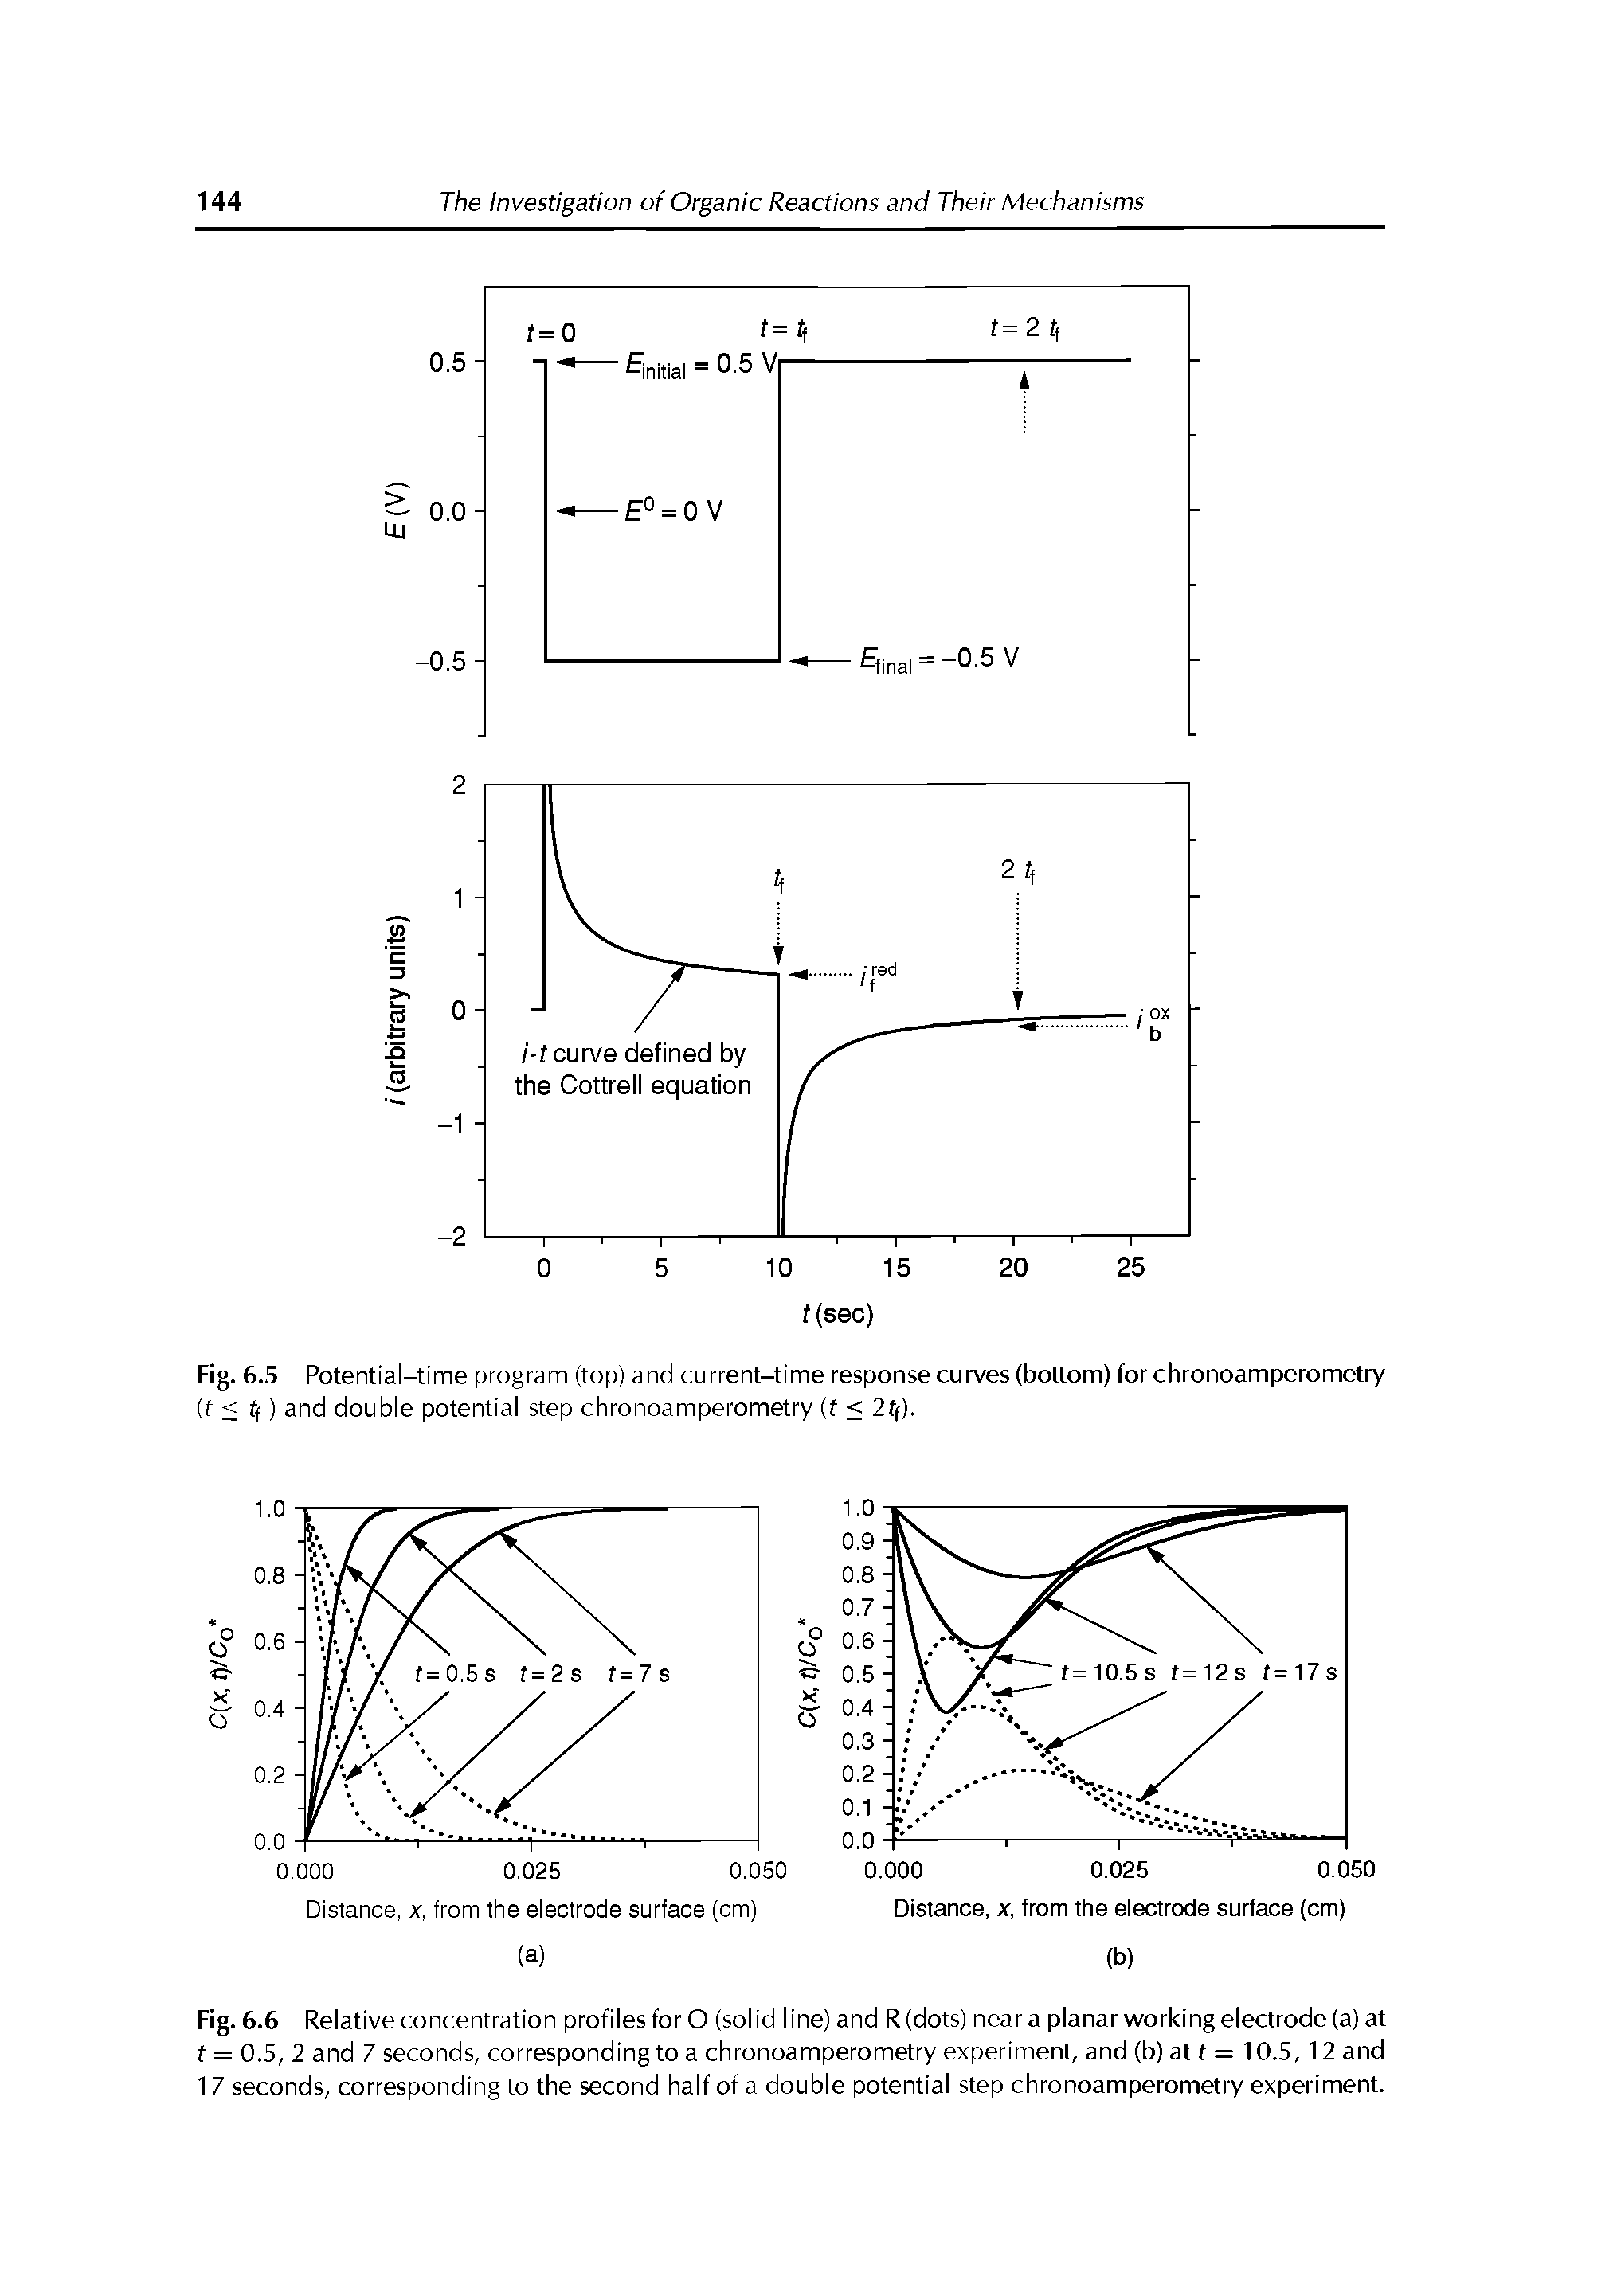 Fig. 6.5 Potential-time program (top) and current-time response curves (bottom) for chronoamperometry (f < ff) and double potential step chronoamperometry (f < 2ff).